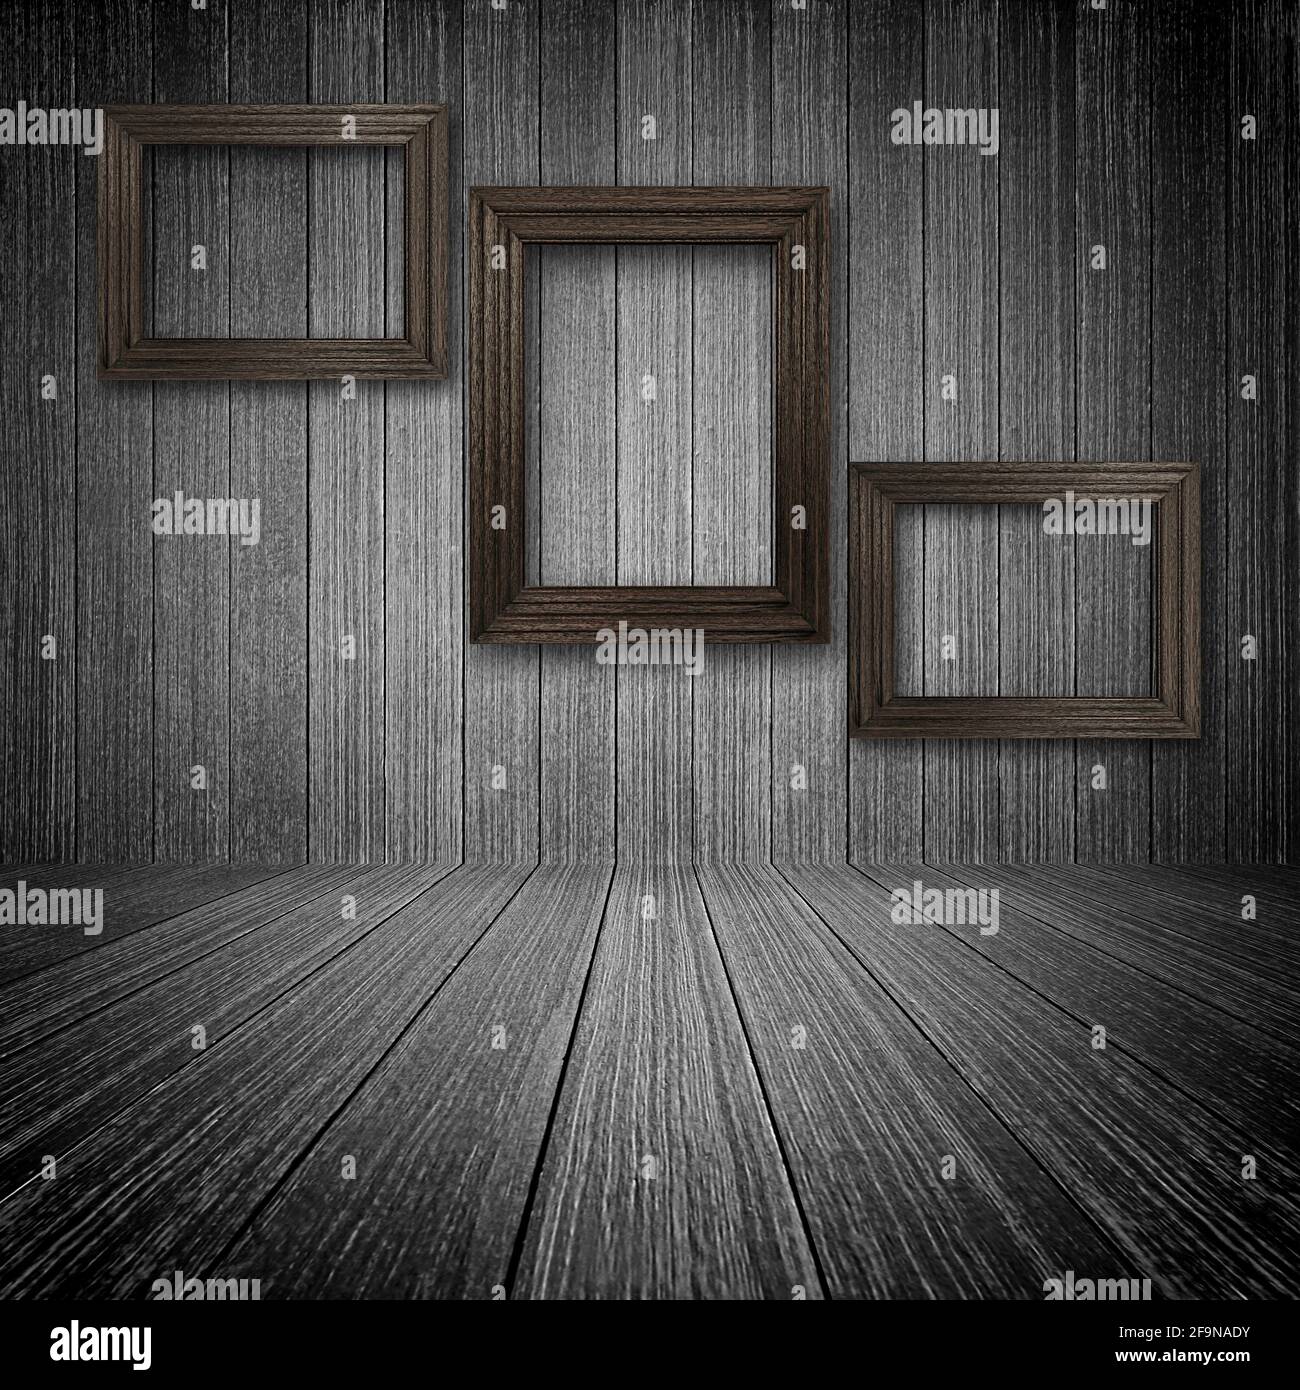 Three wooden picture frames on the wall inside dark room Stock Photo